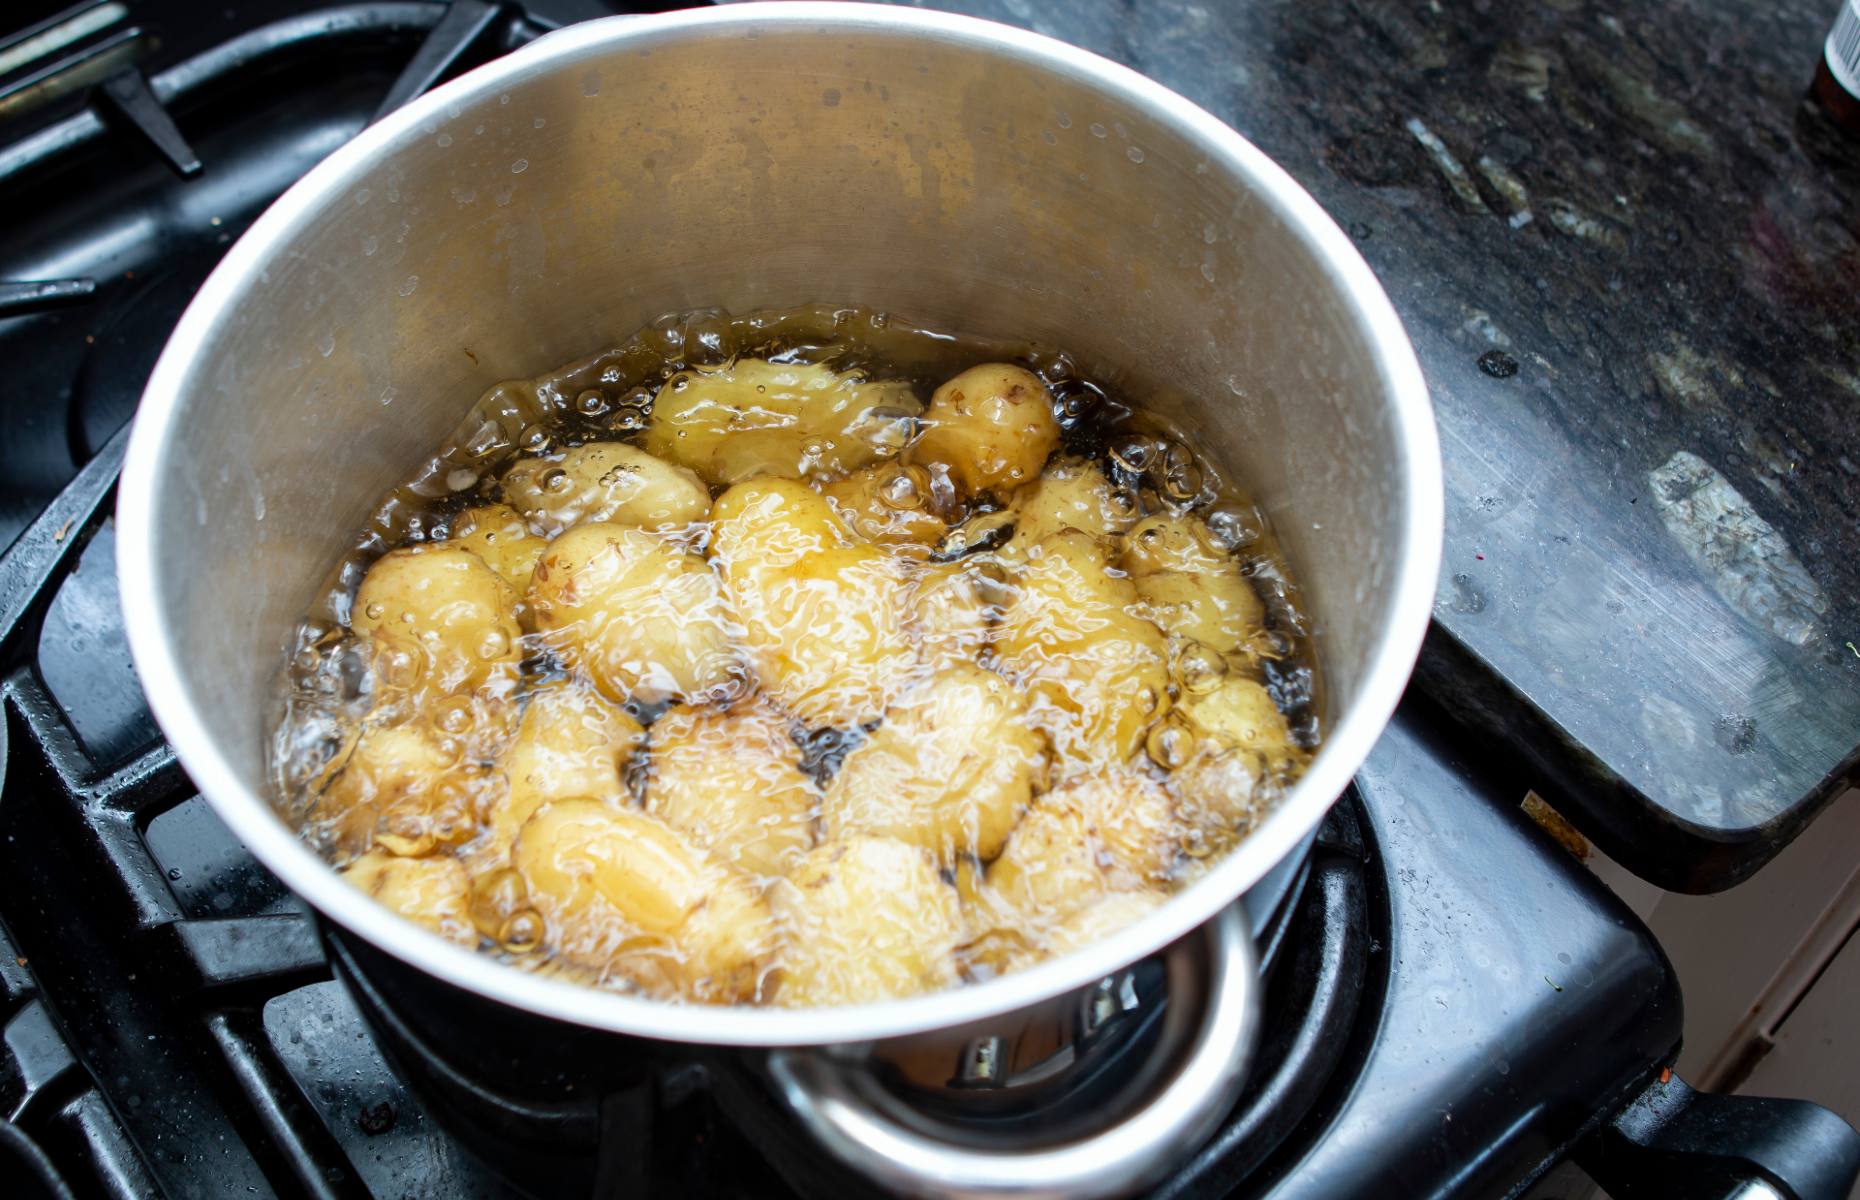 Jersey royals cooking in simmering water [image: Clash and Clash/Shutterstock]